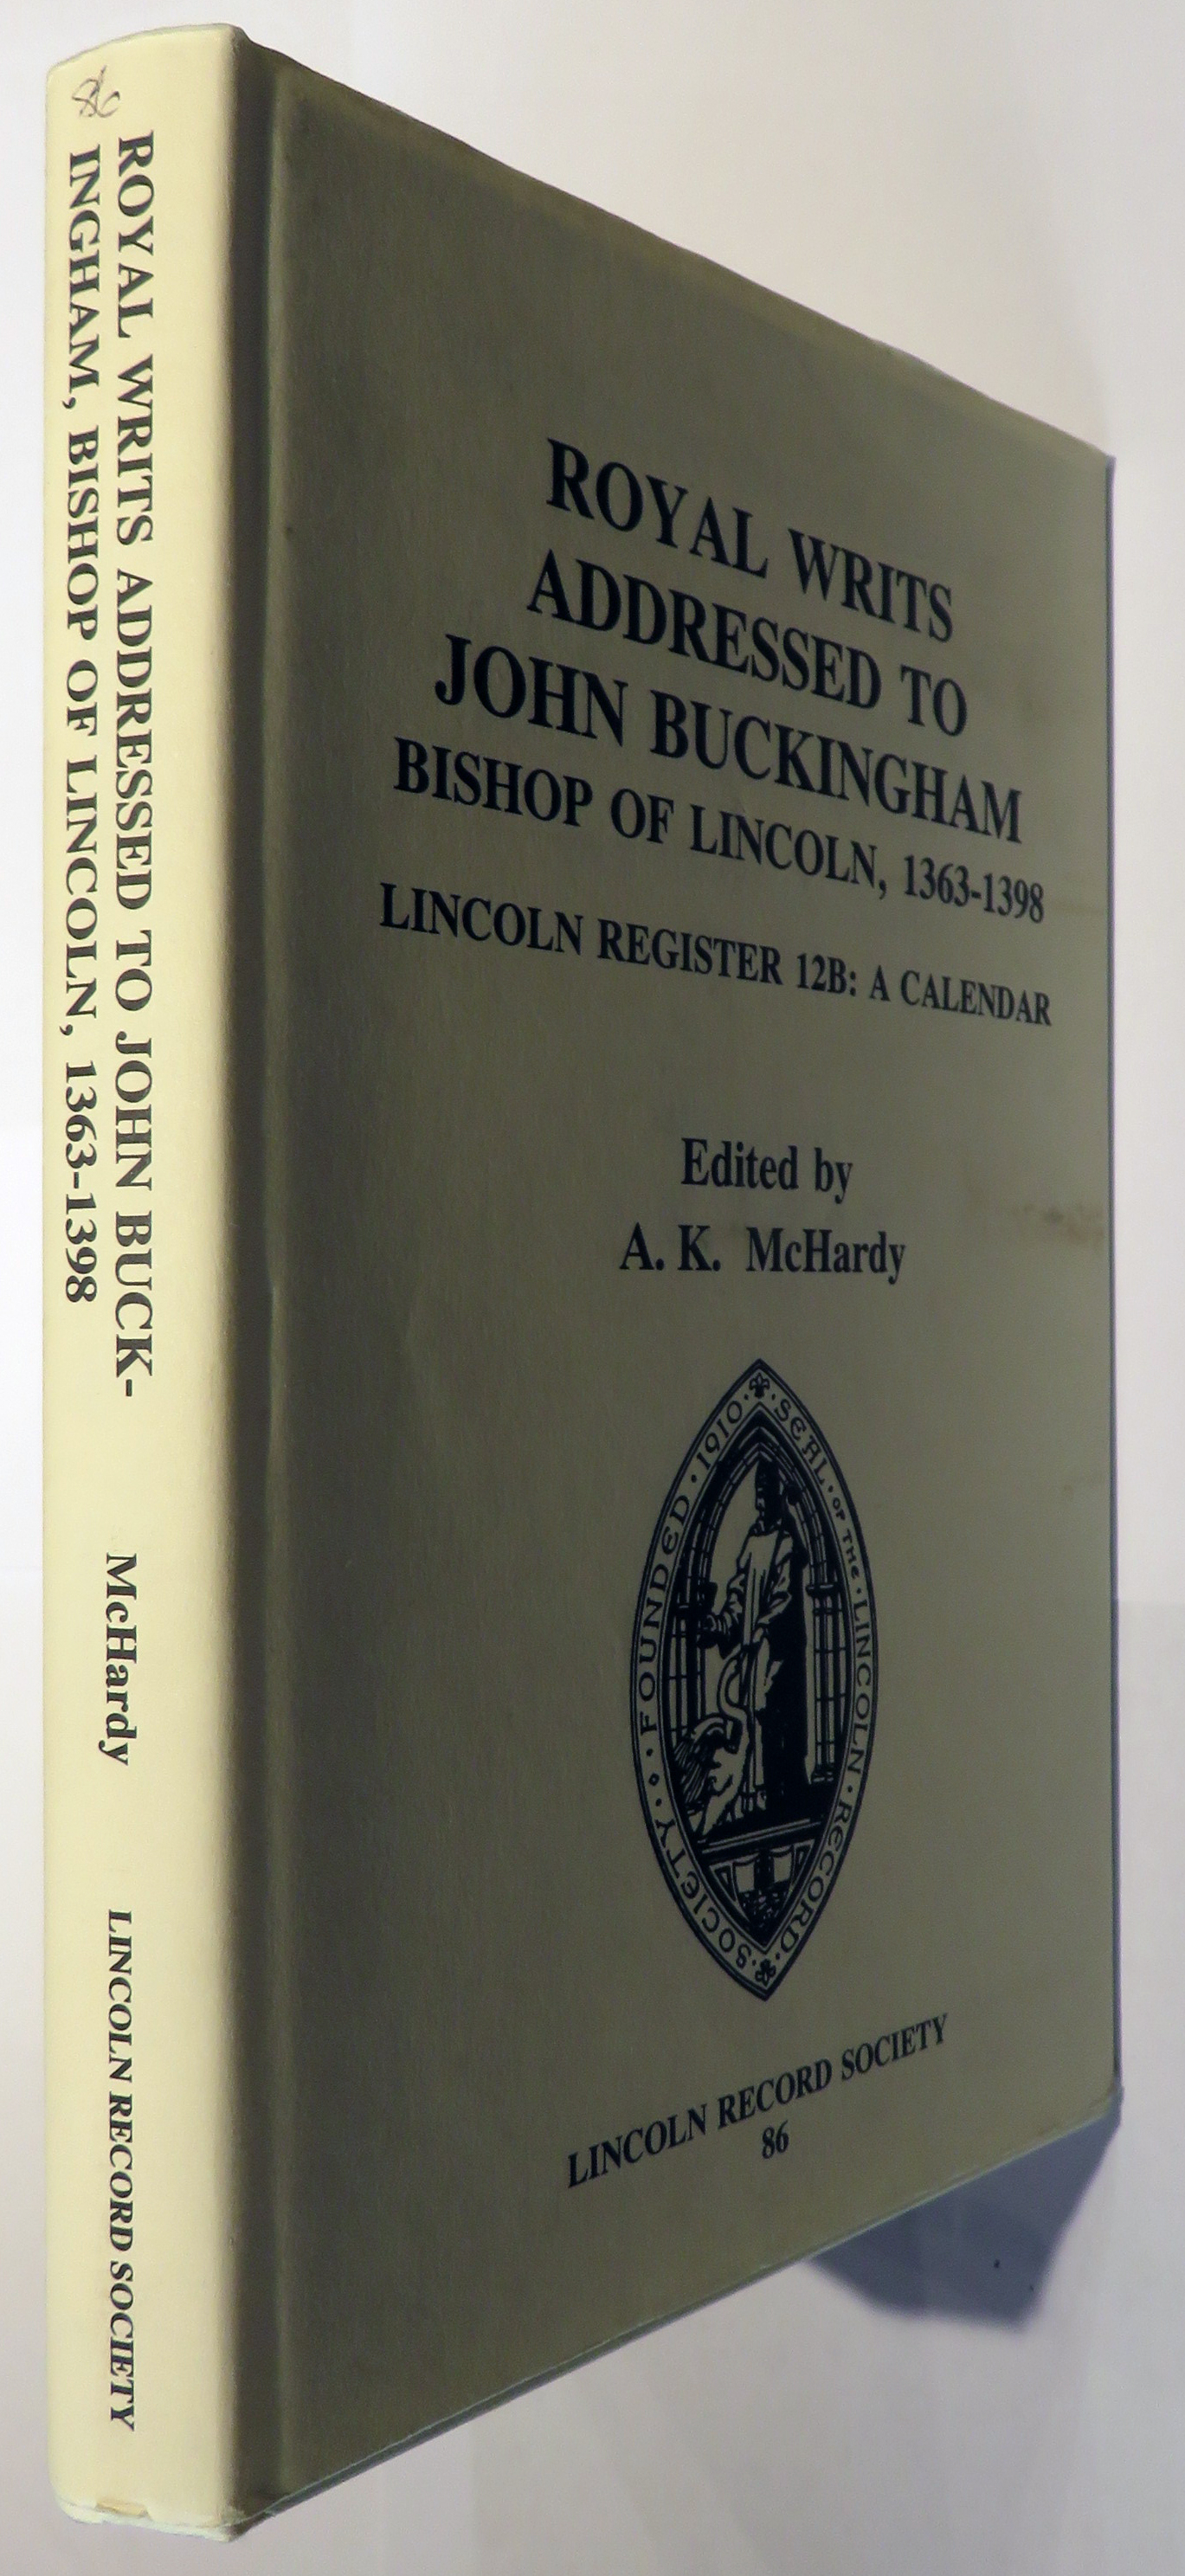 Royal Writs Addressed To John Buckingham Bishop Of Lincoln 1363-1398 Lincoln Register 12B; A Calendar. The Publications Of Lincoln Record Society Volume 86